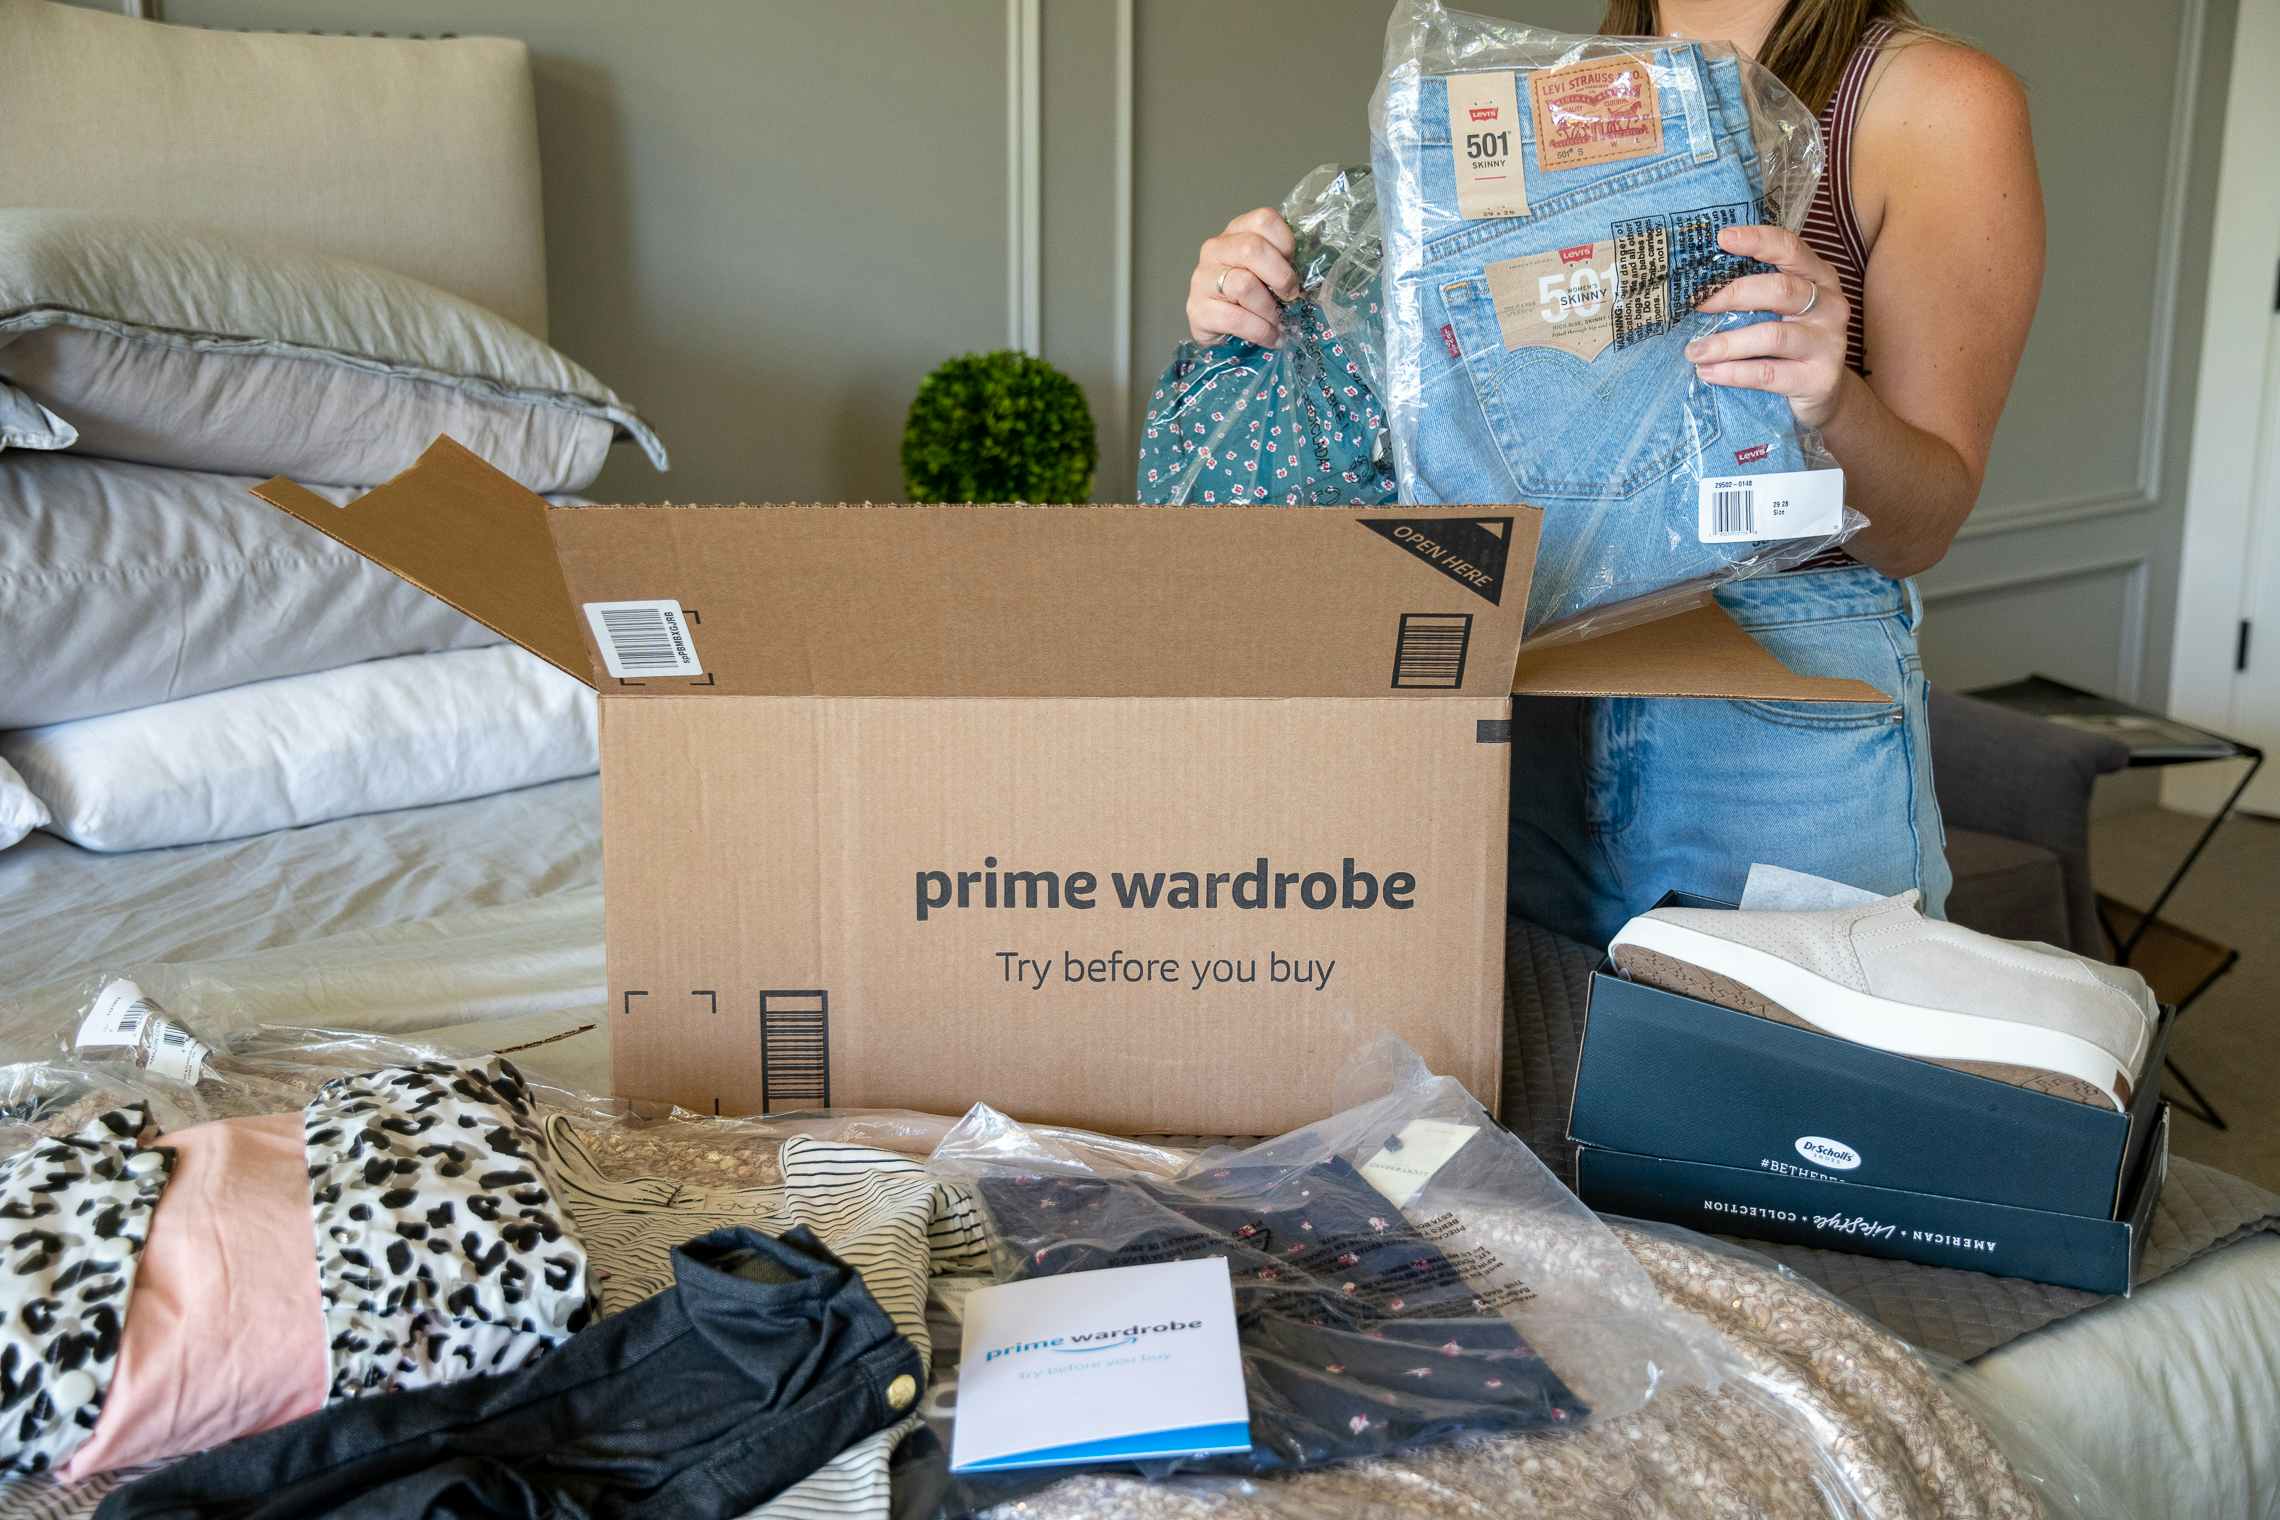 A woman unpacking an Amazon prime wardrobe order from a box on her bed.